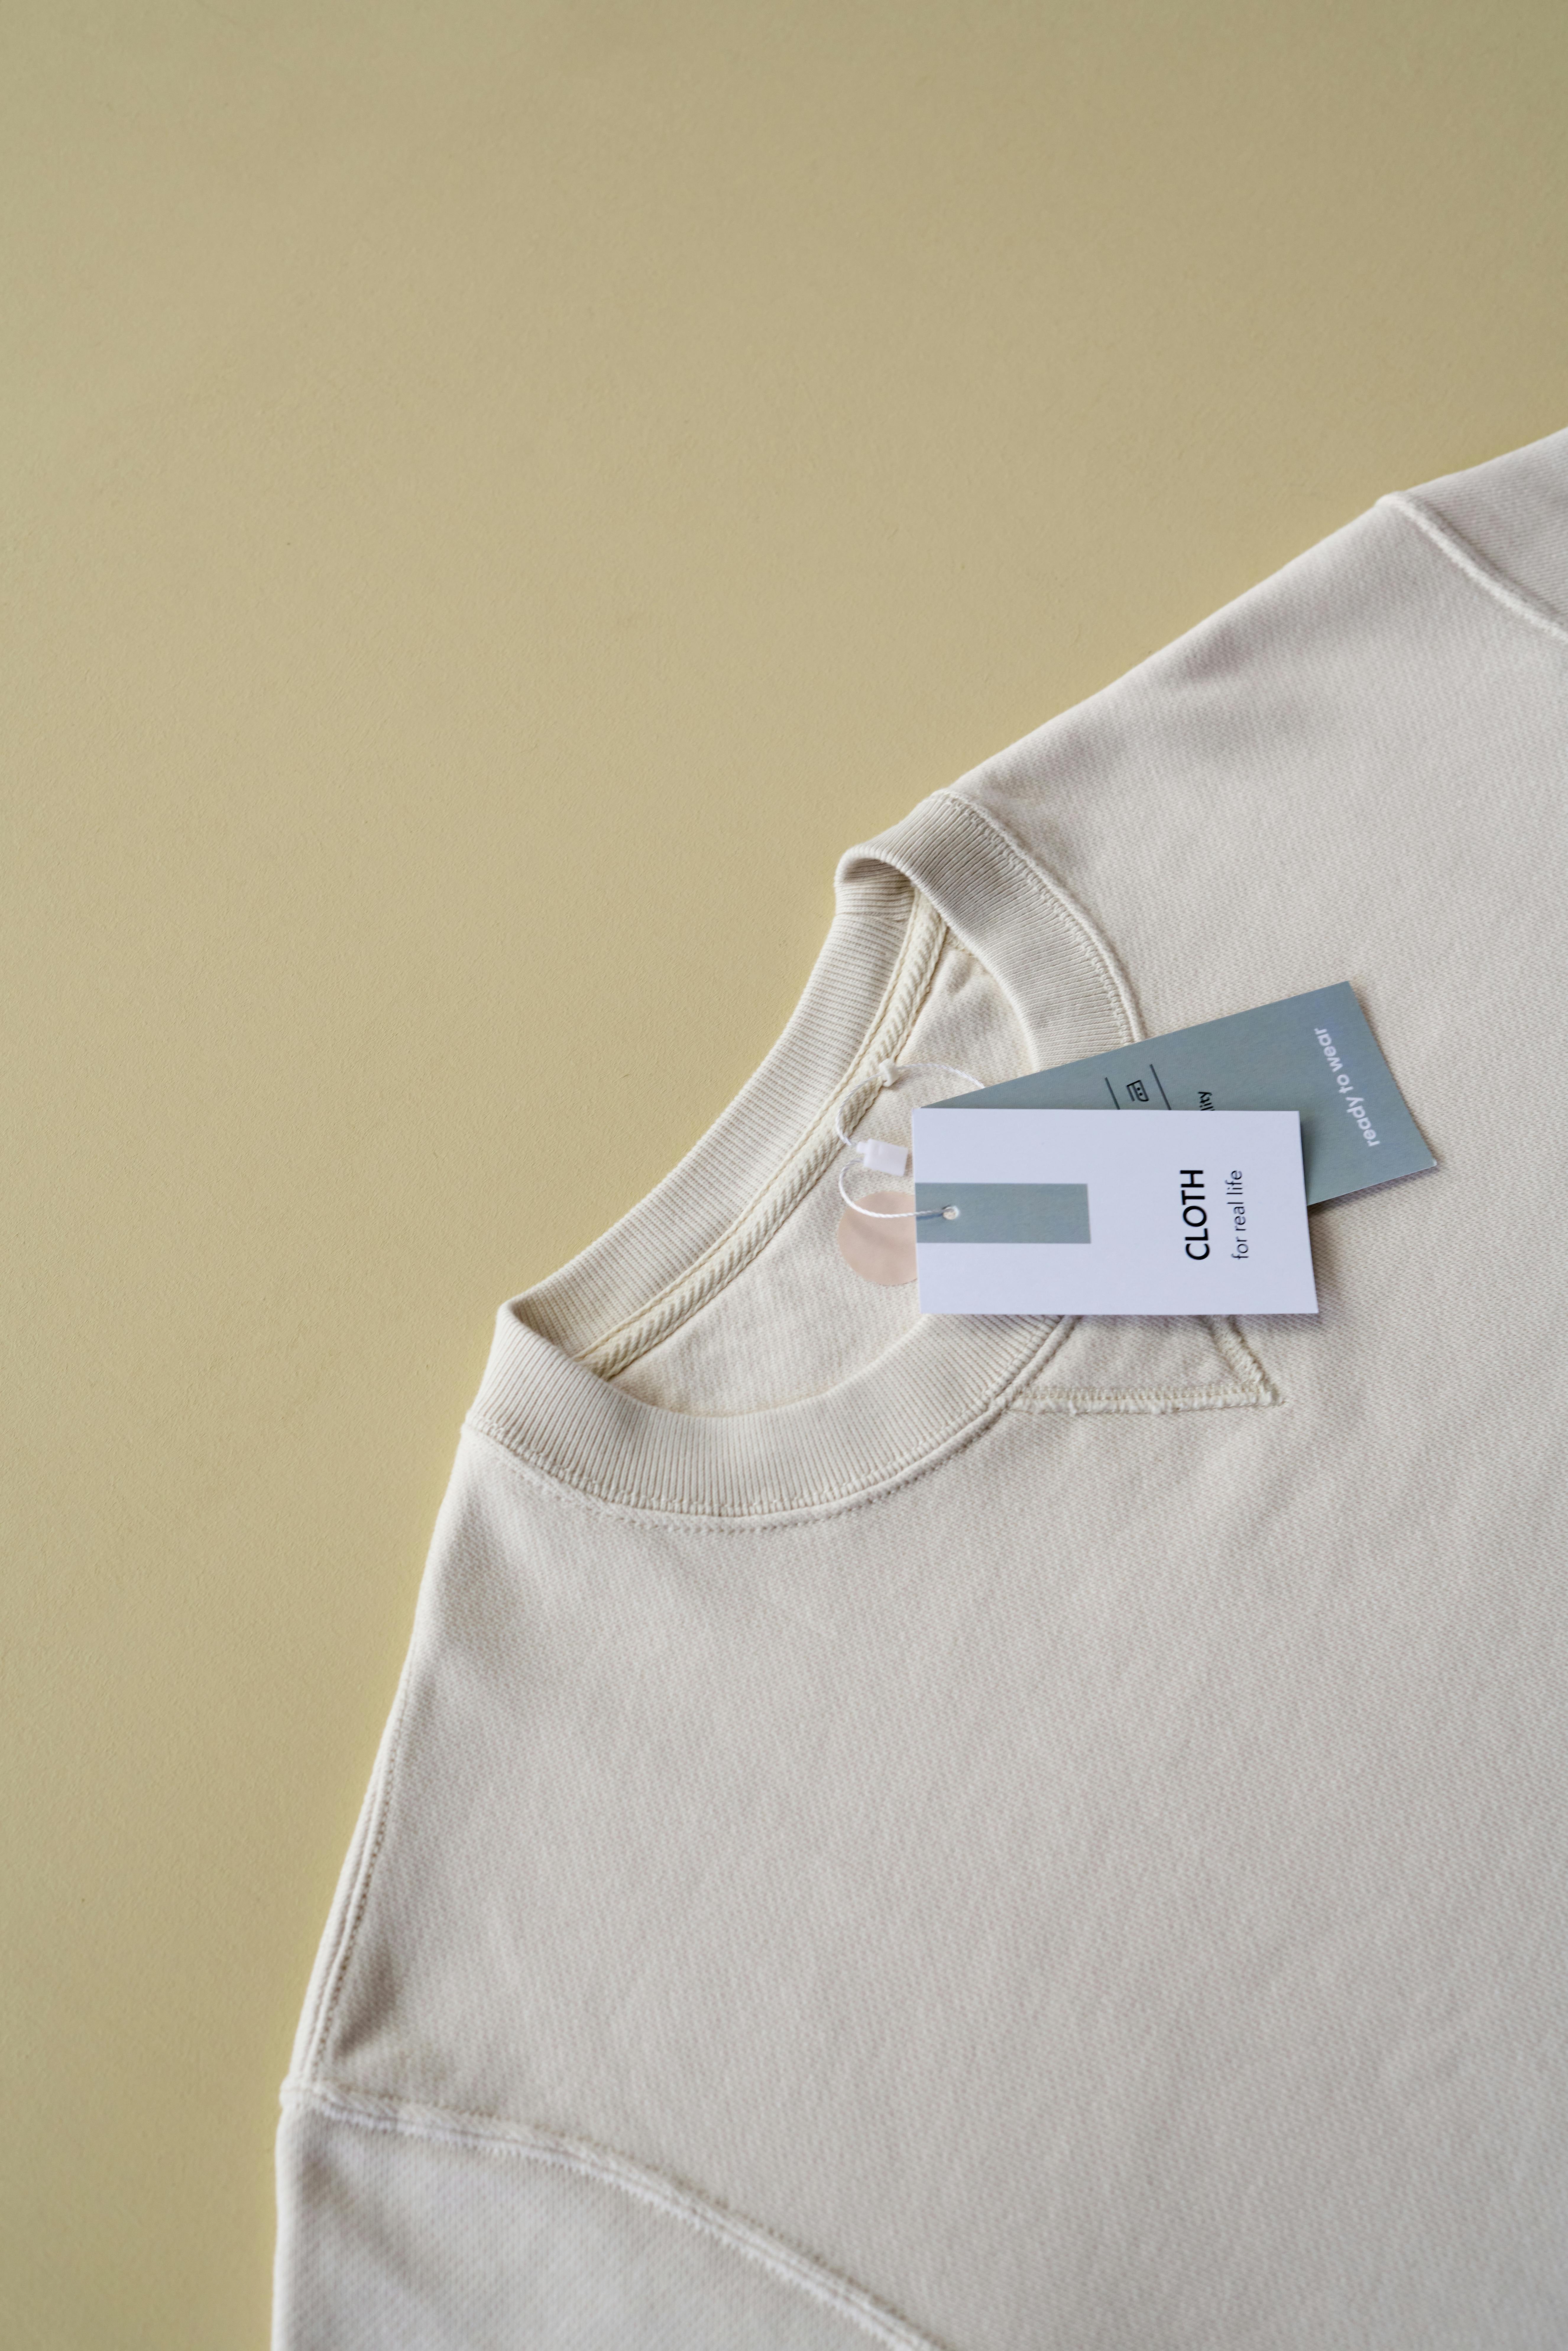 High resolution images of a not-worn t-shirt with style, that looks smart and showing the shop tag (that includes a size chart)